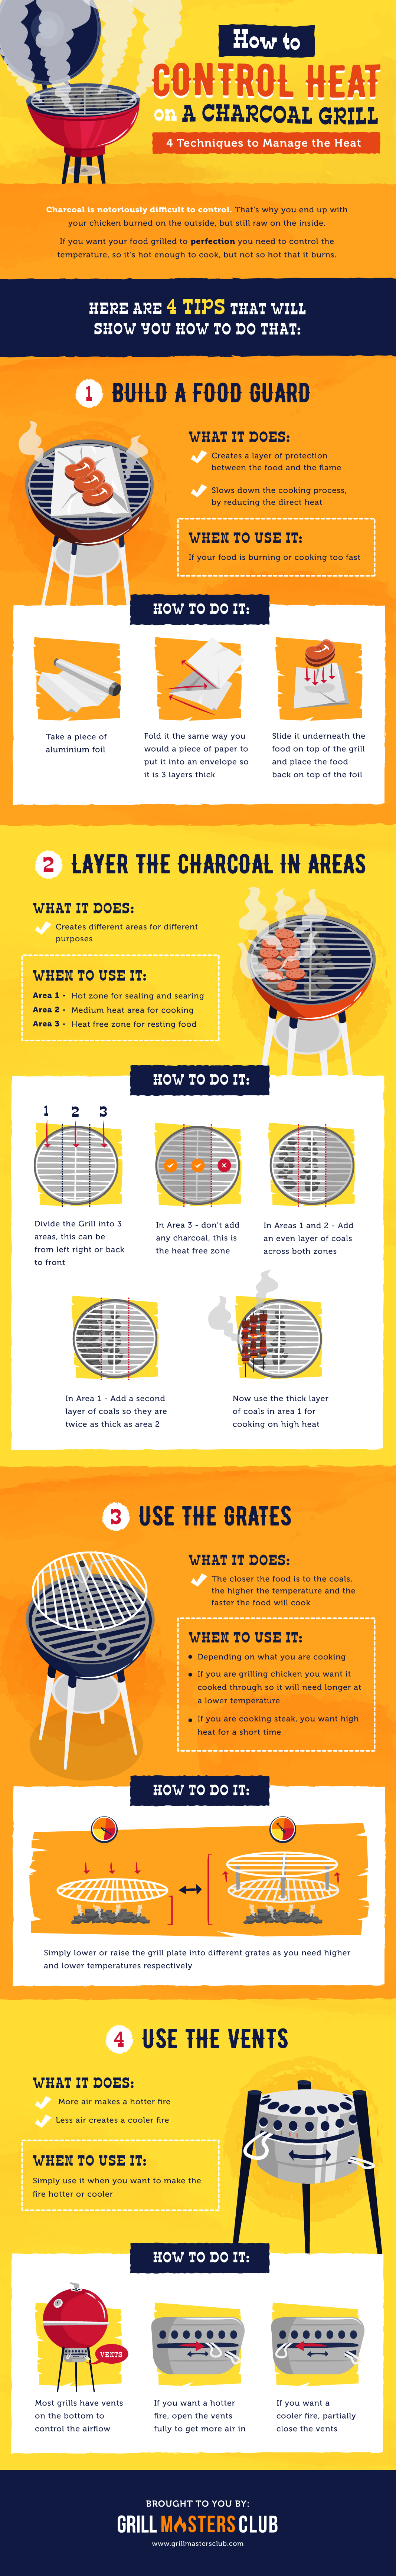 Infographic for How to Control Heat On a Charcoal Grill